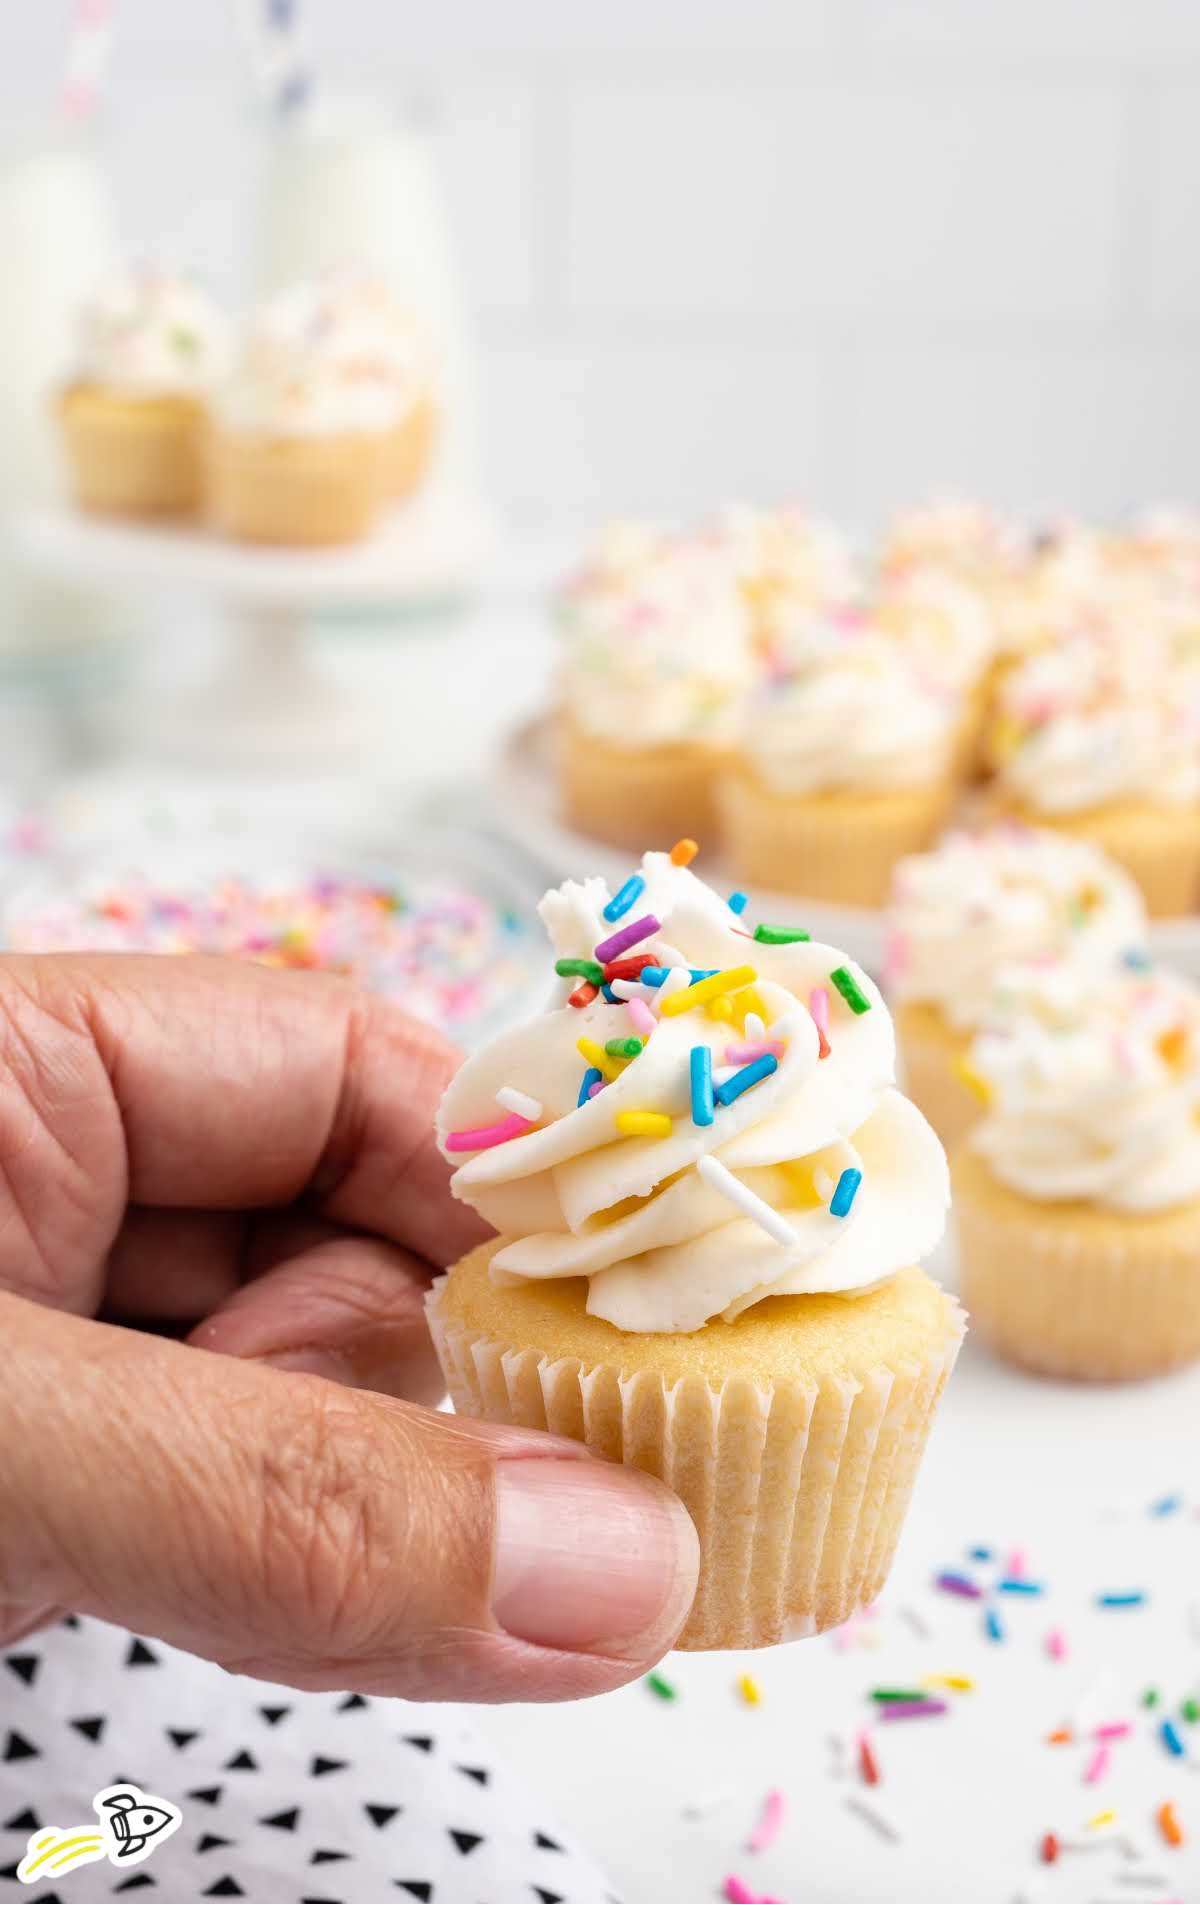 a Mini Cupcakes topped with sprinkles being held